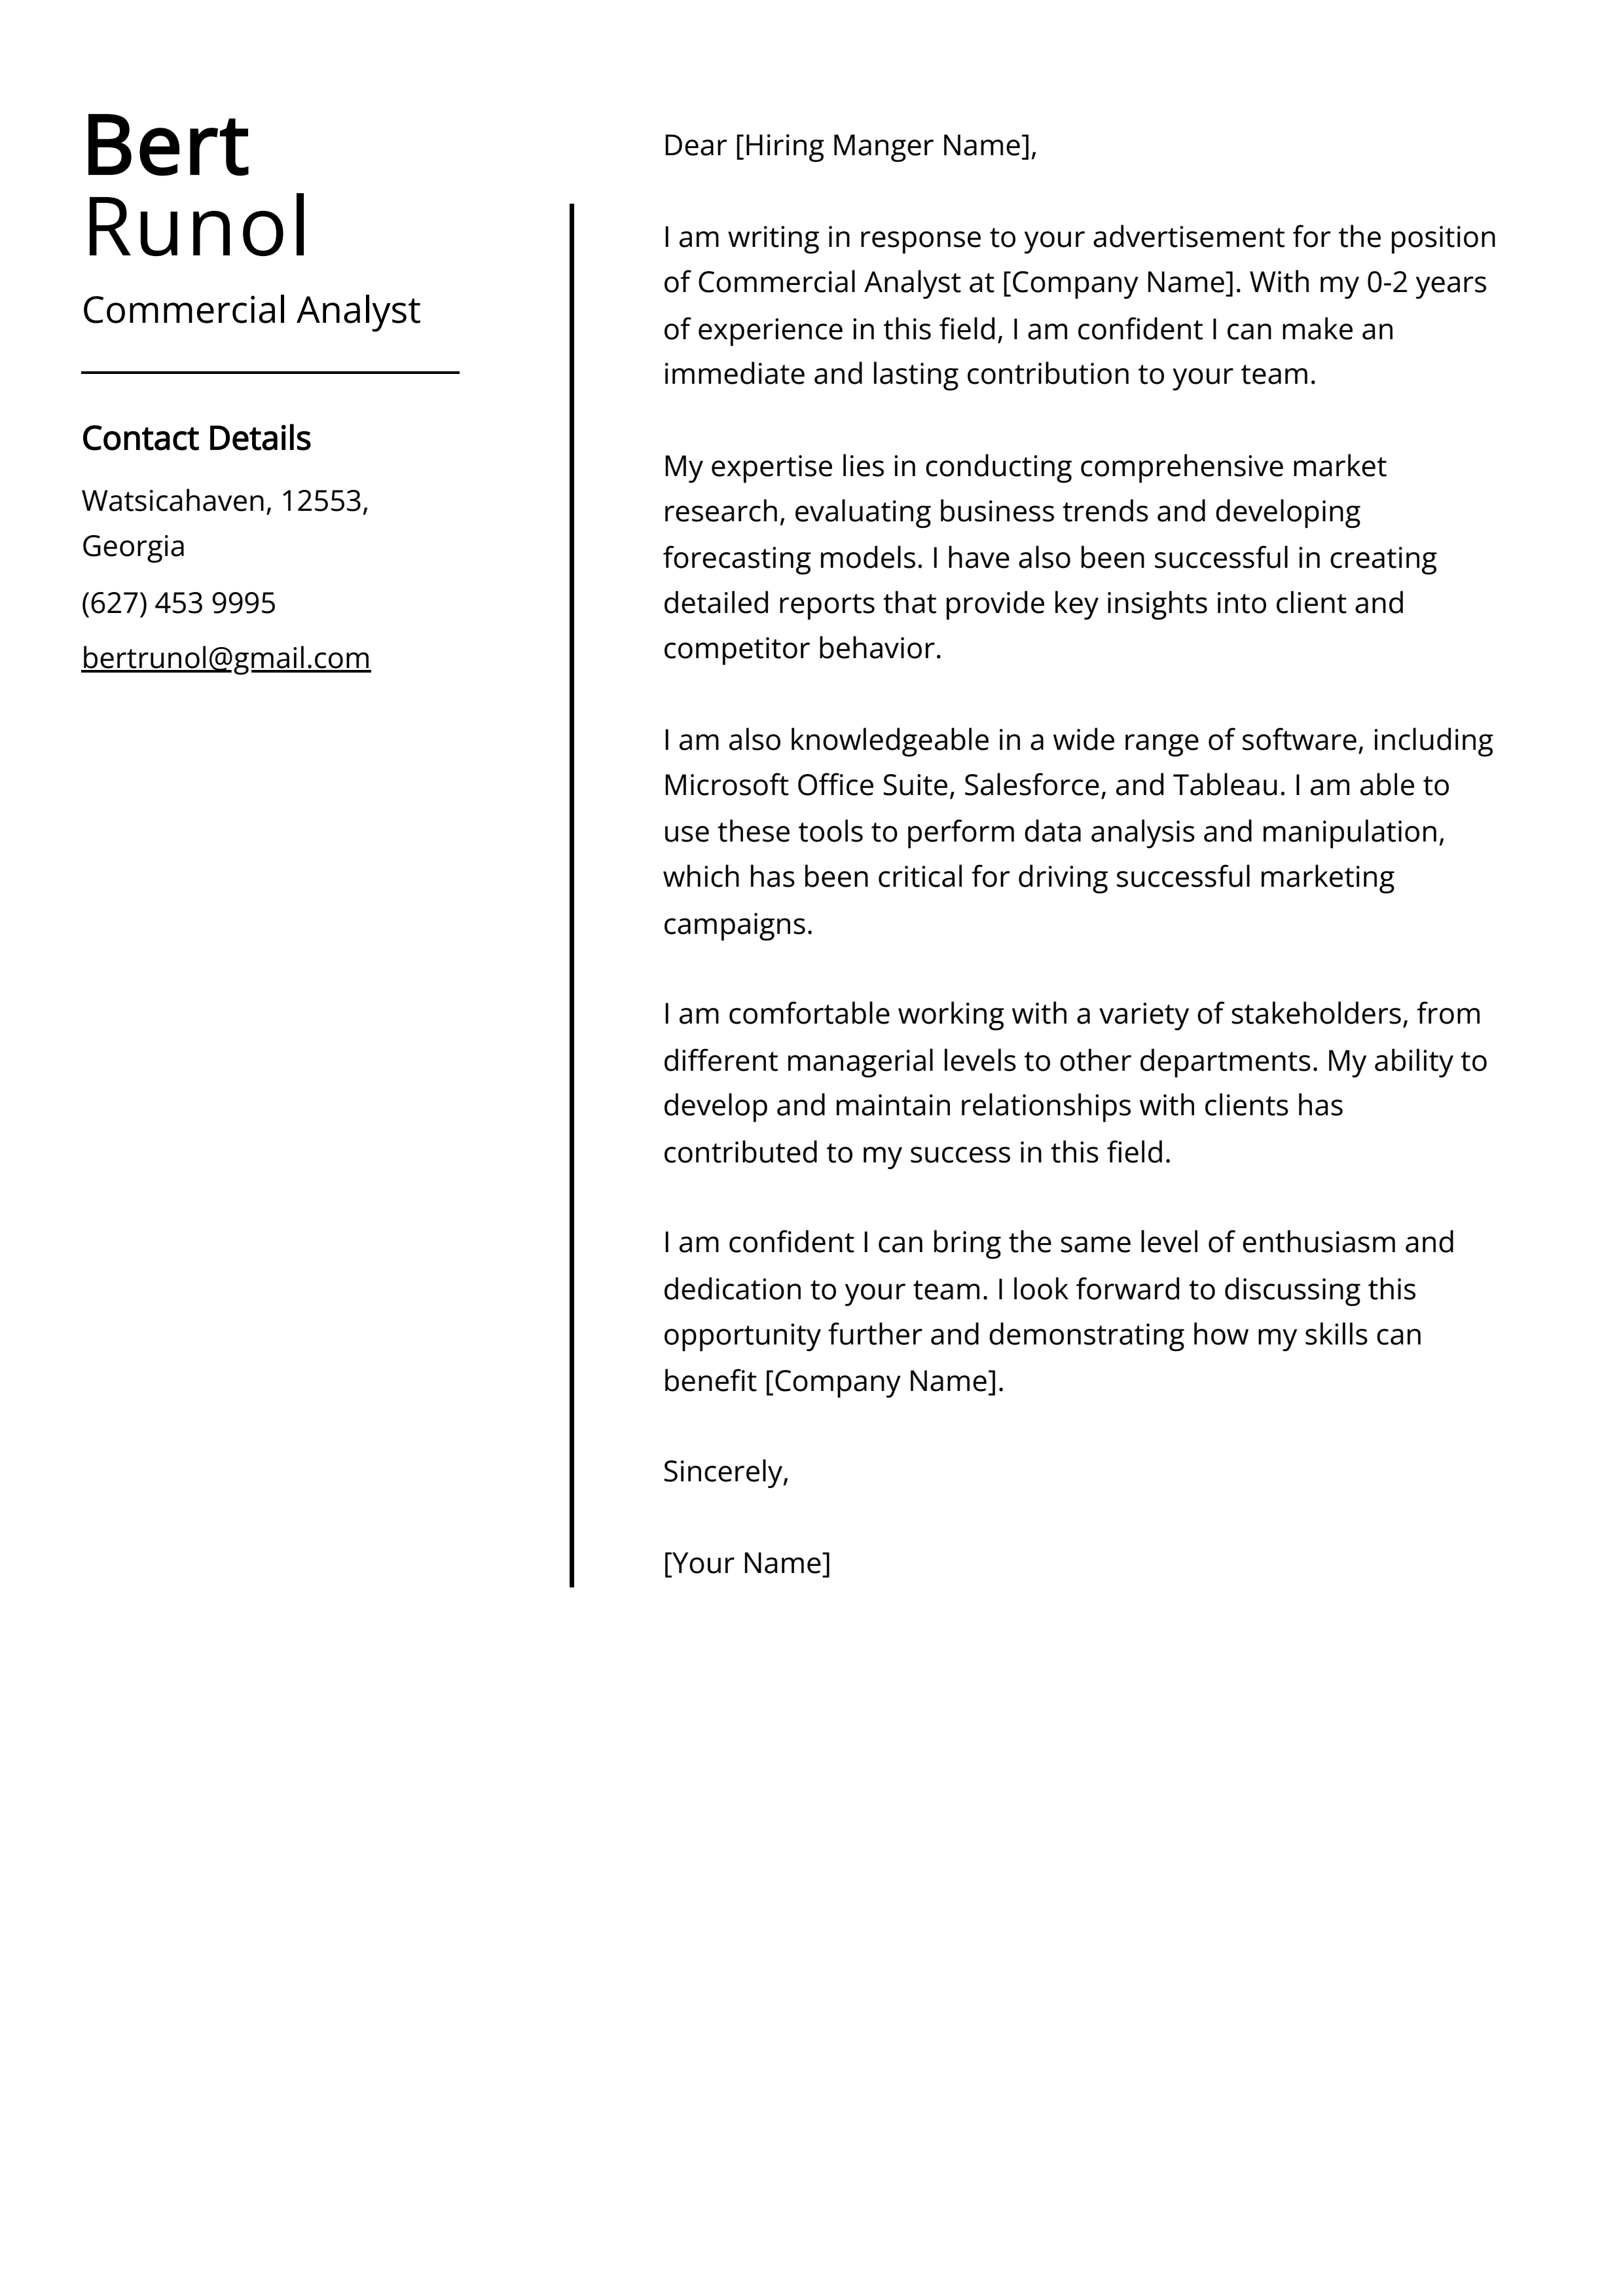 Commercial Analyst Cover Letter Example